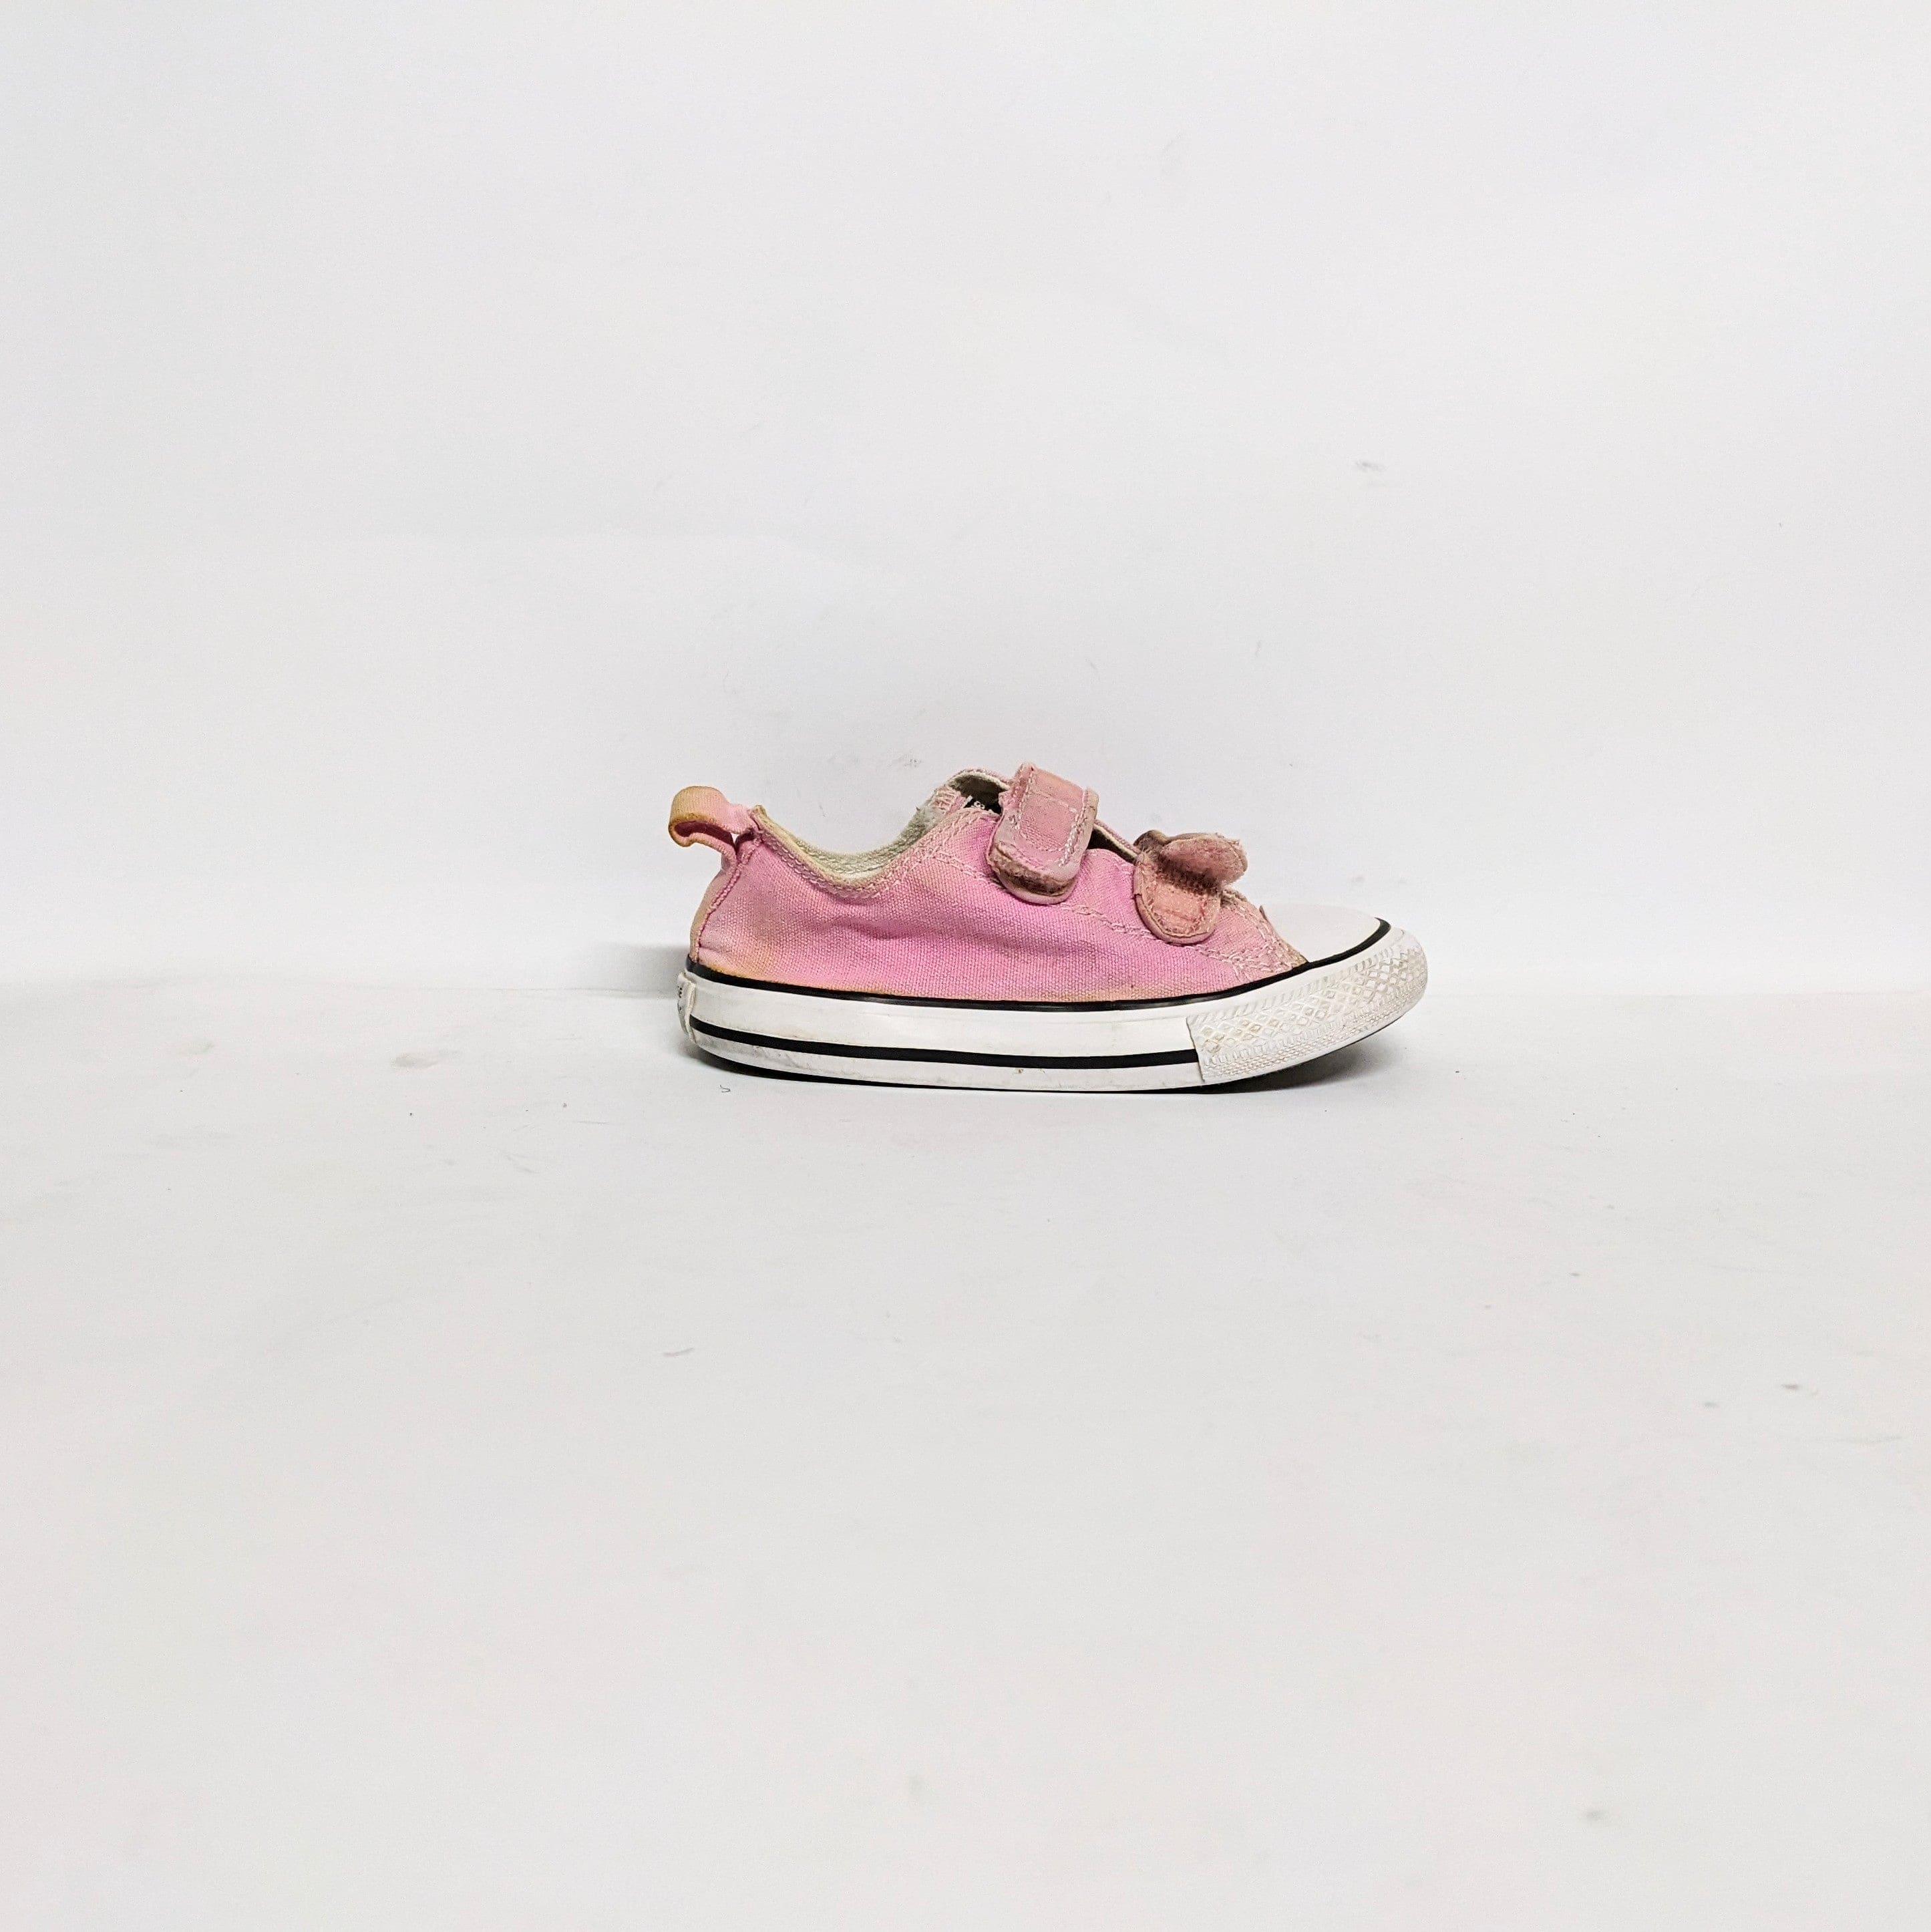 Converse All Star Pink Kids Sneakers